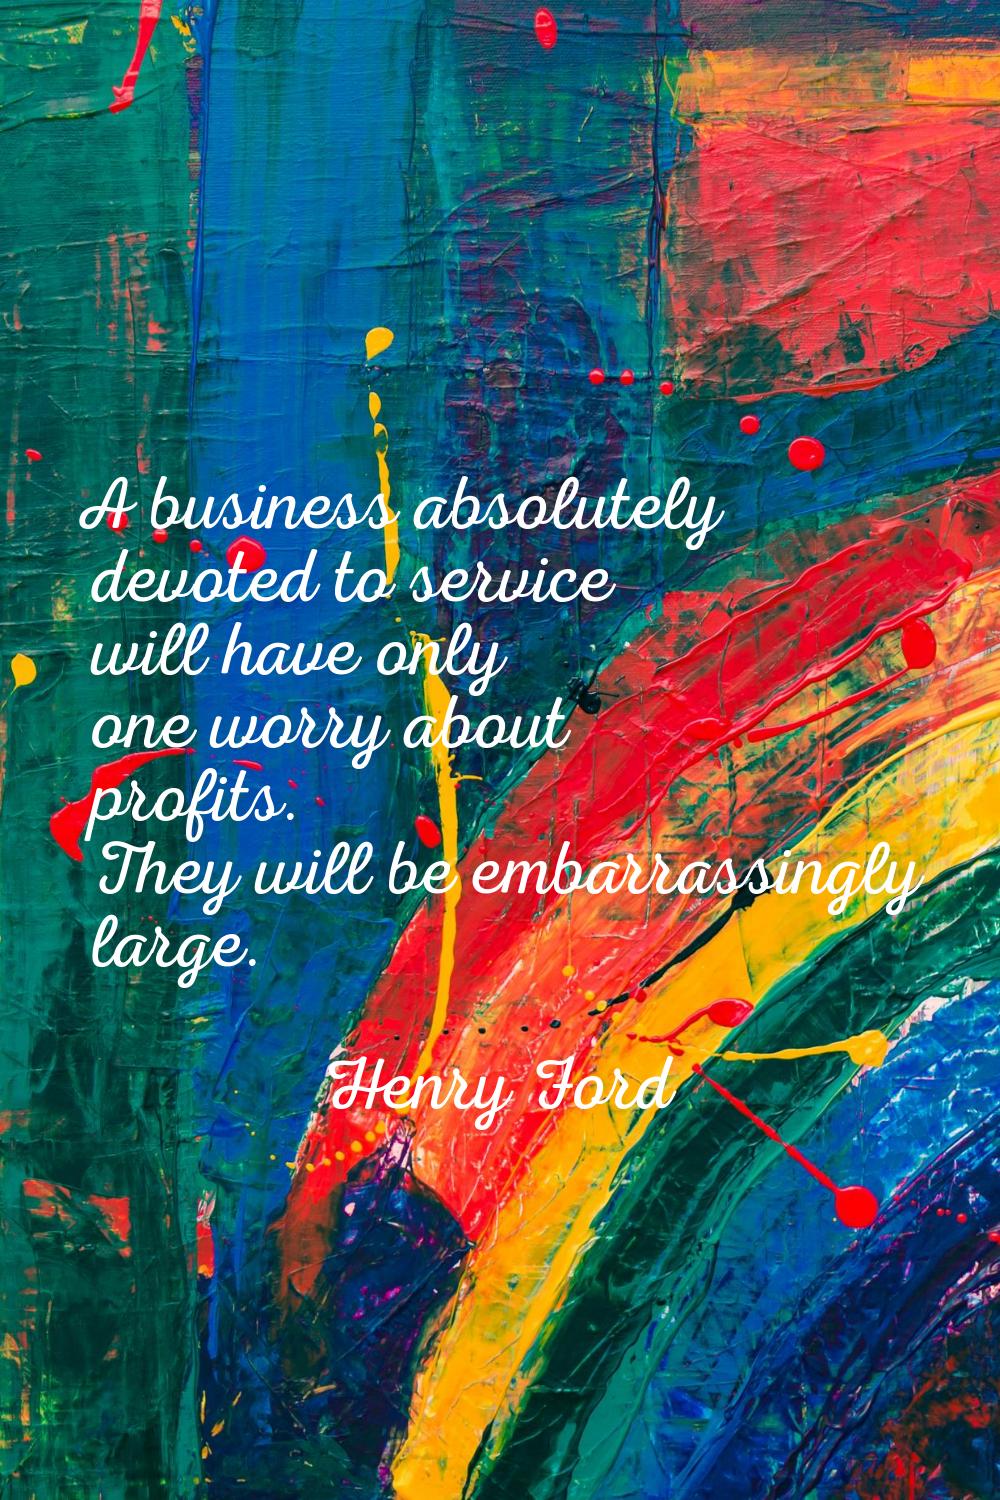 A business absolutely devoted to service will have only one worry about profits. They will be embar